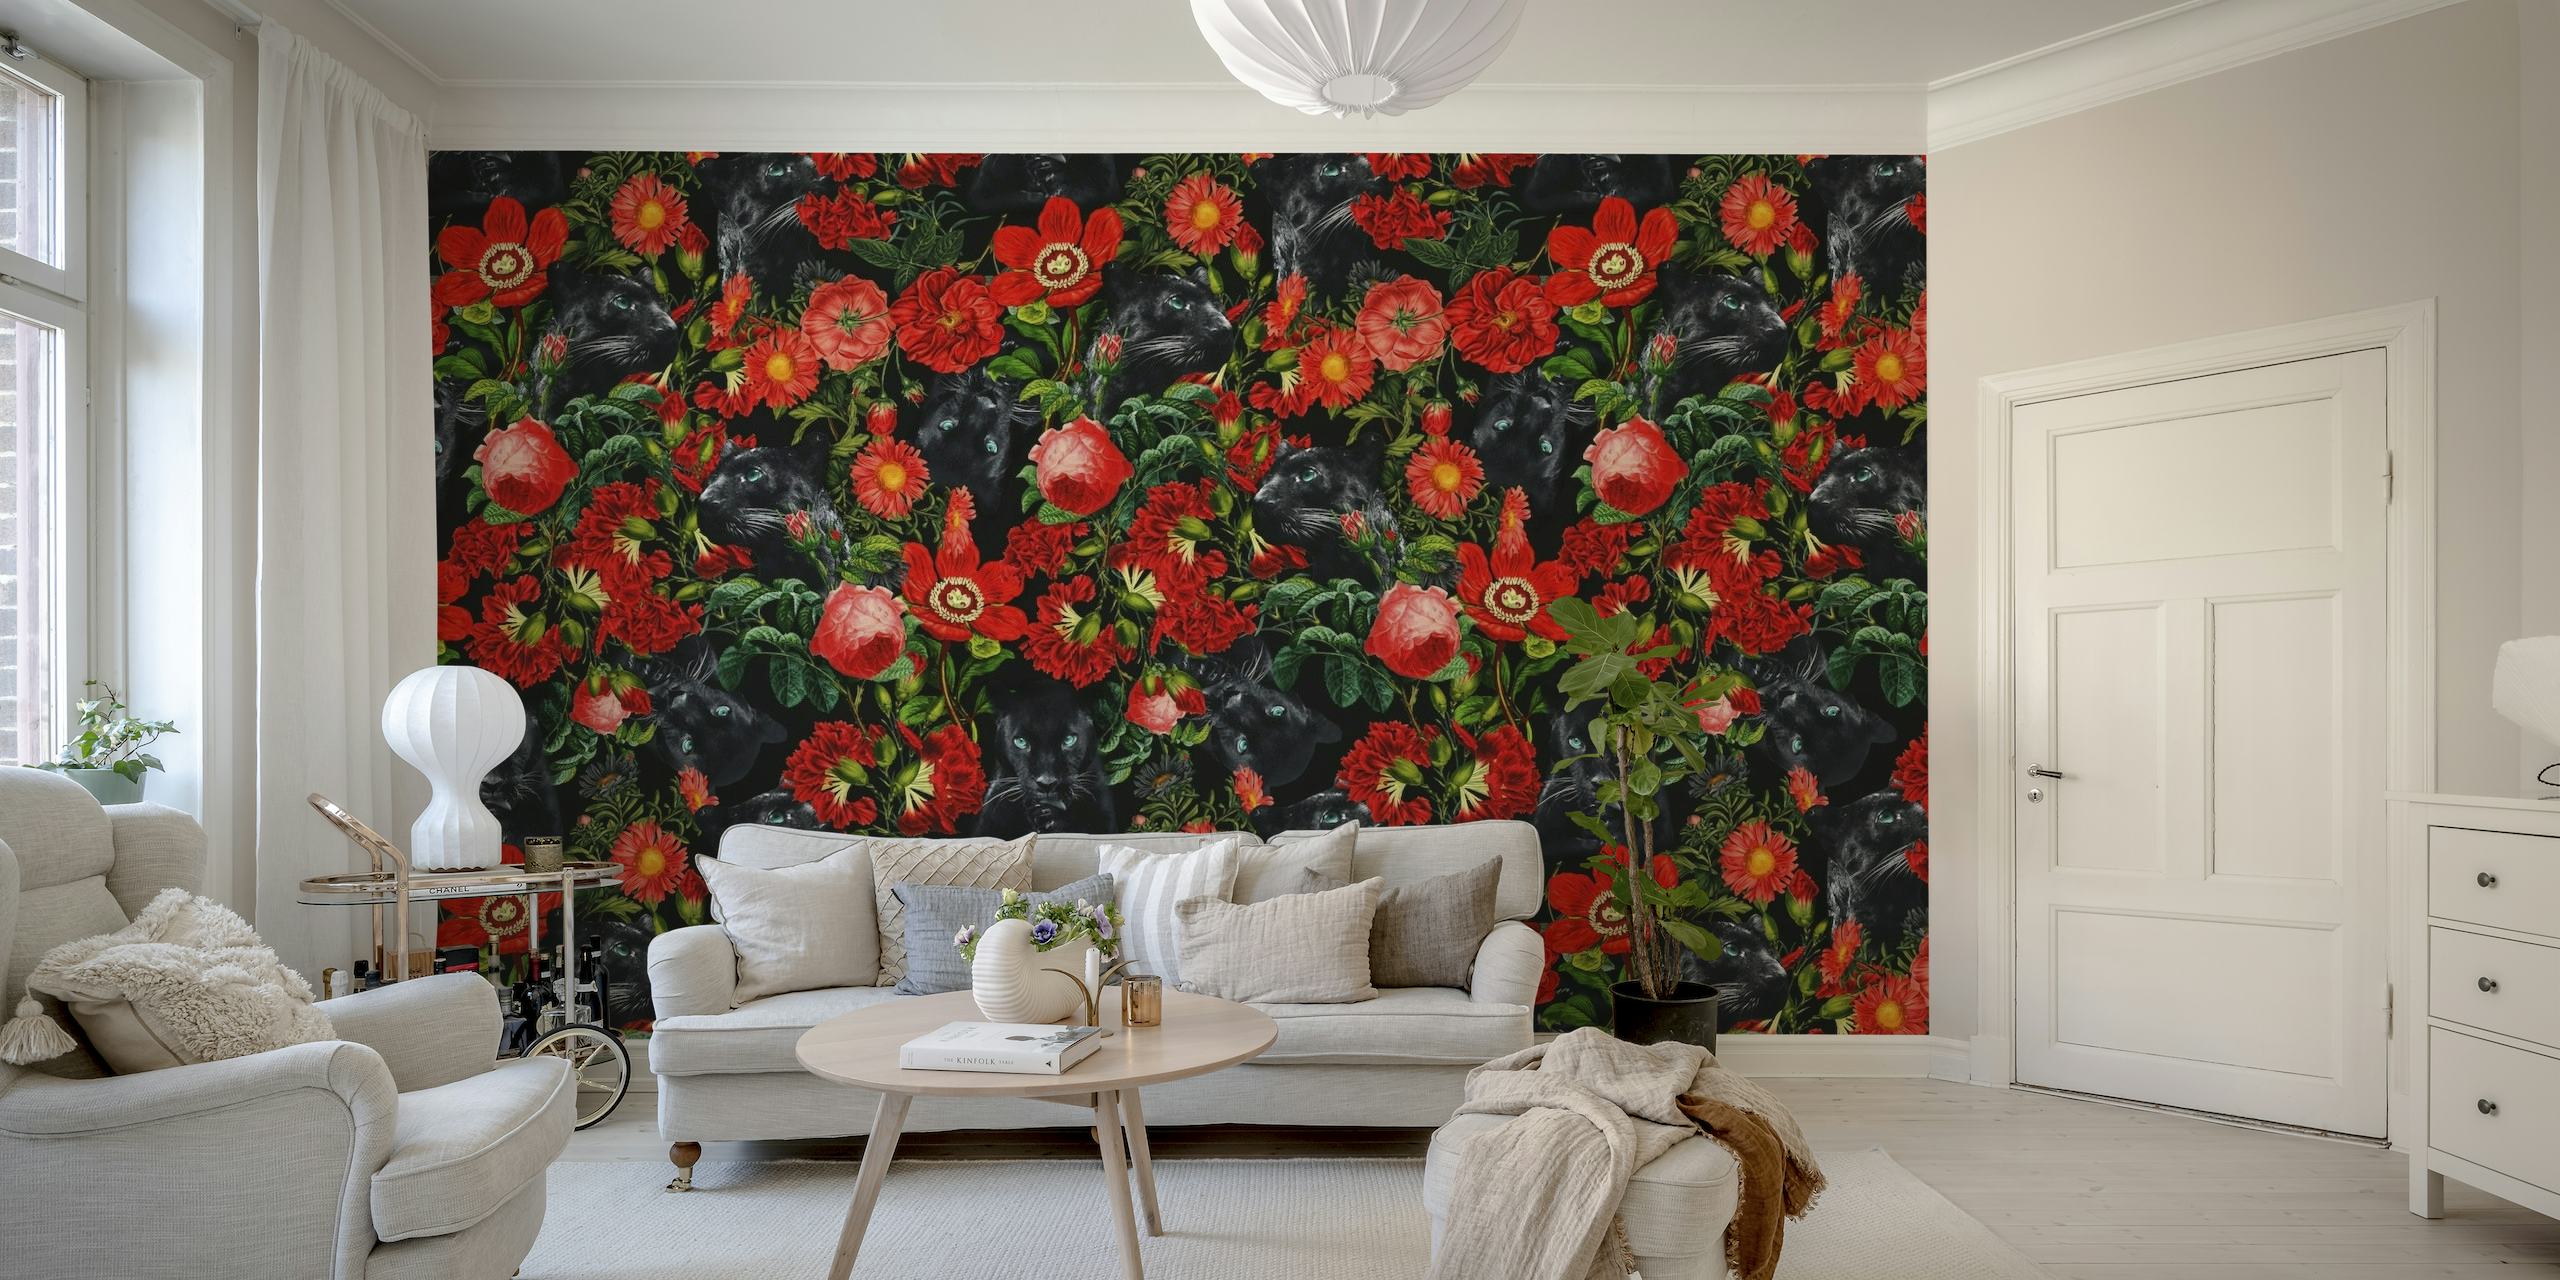 Wall mural with a panther and red floral pattern on a dark background